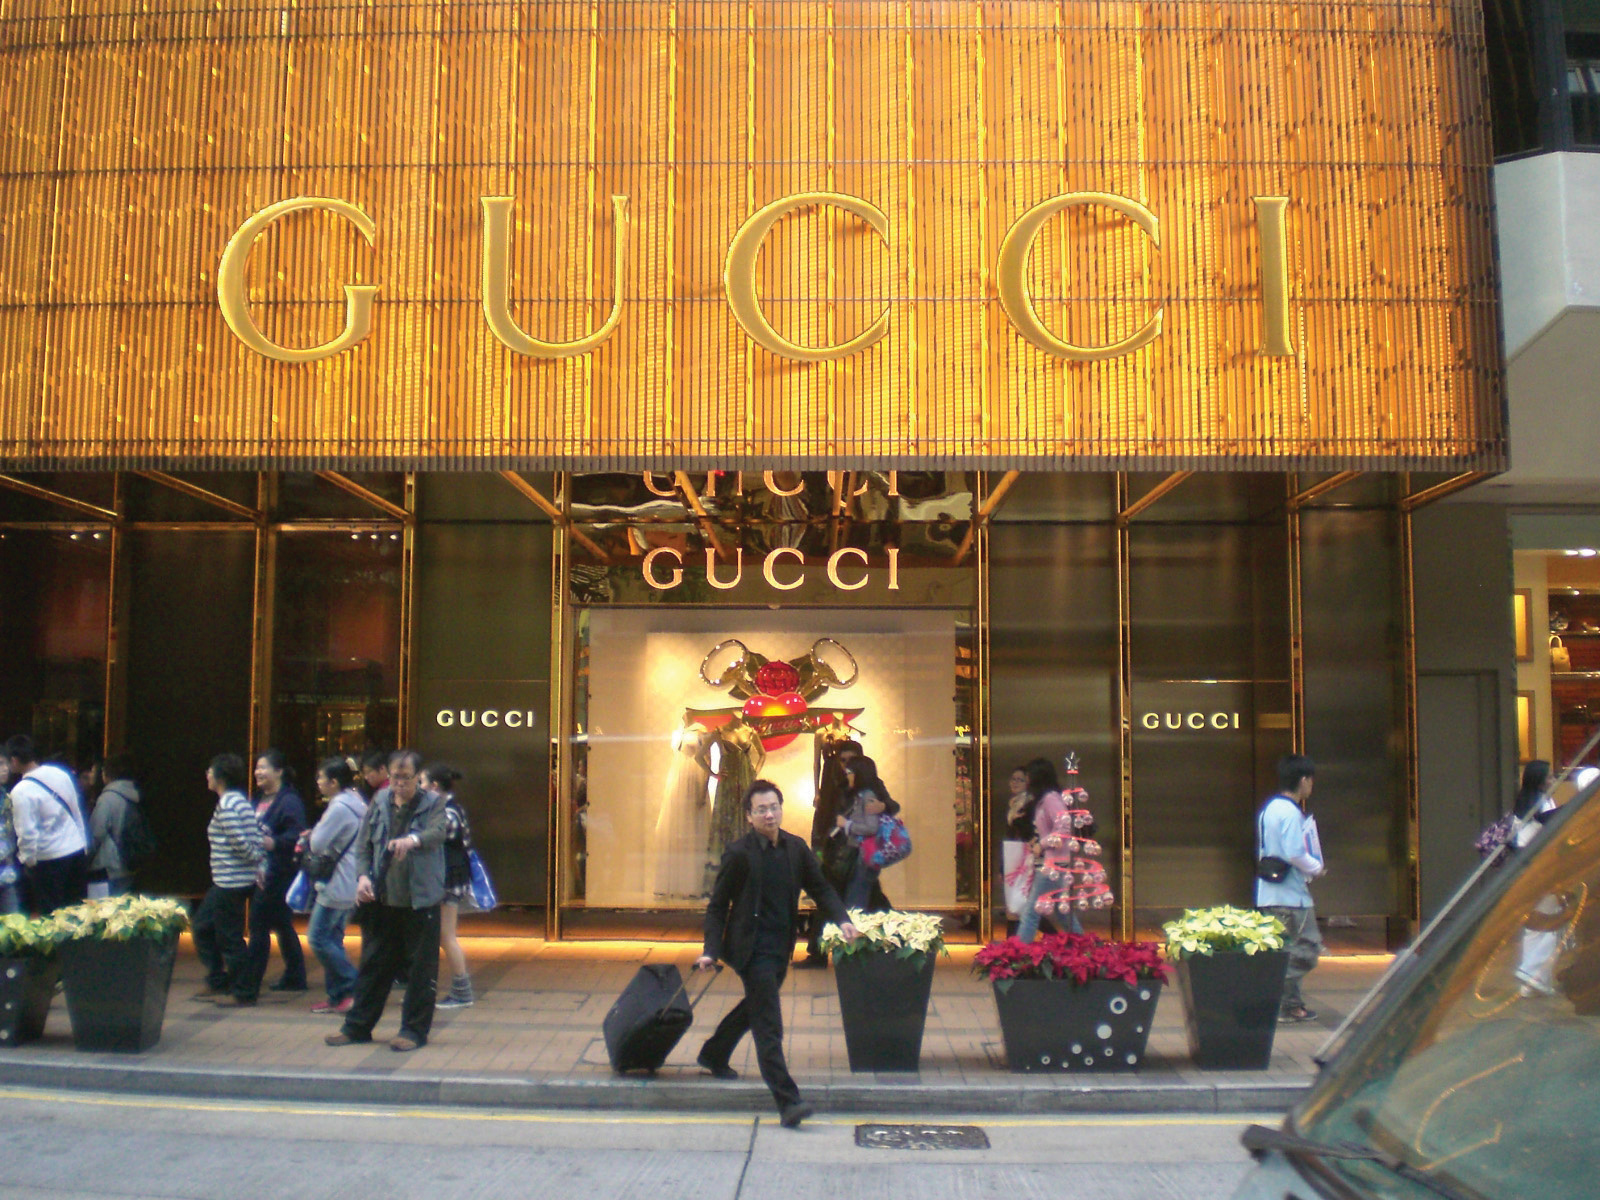 Storefront of a Gucci store